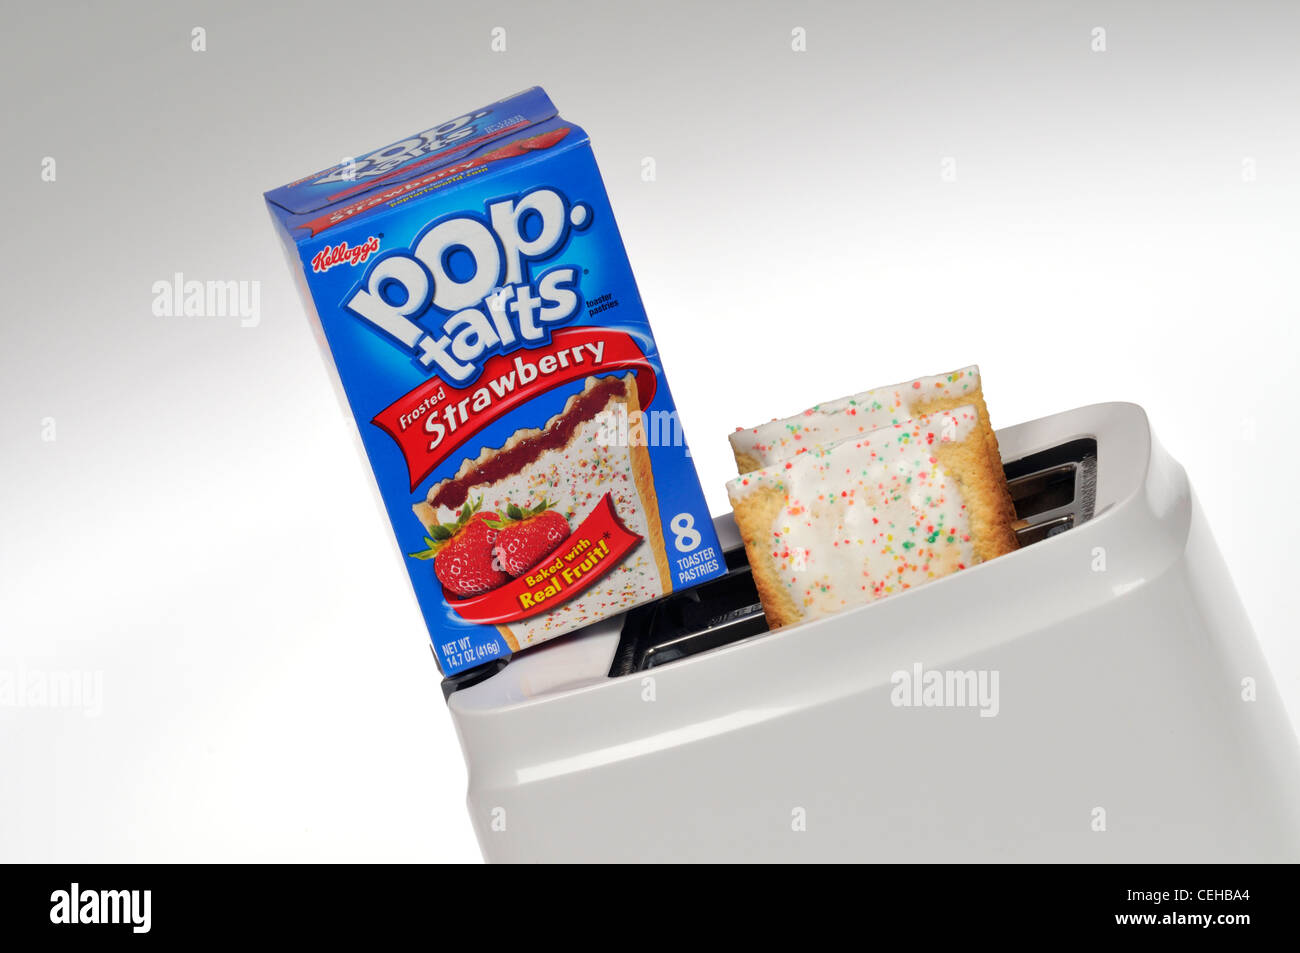 Pop Tarts High Resolution Stock Photography and Images - Alamy